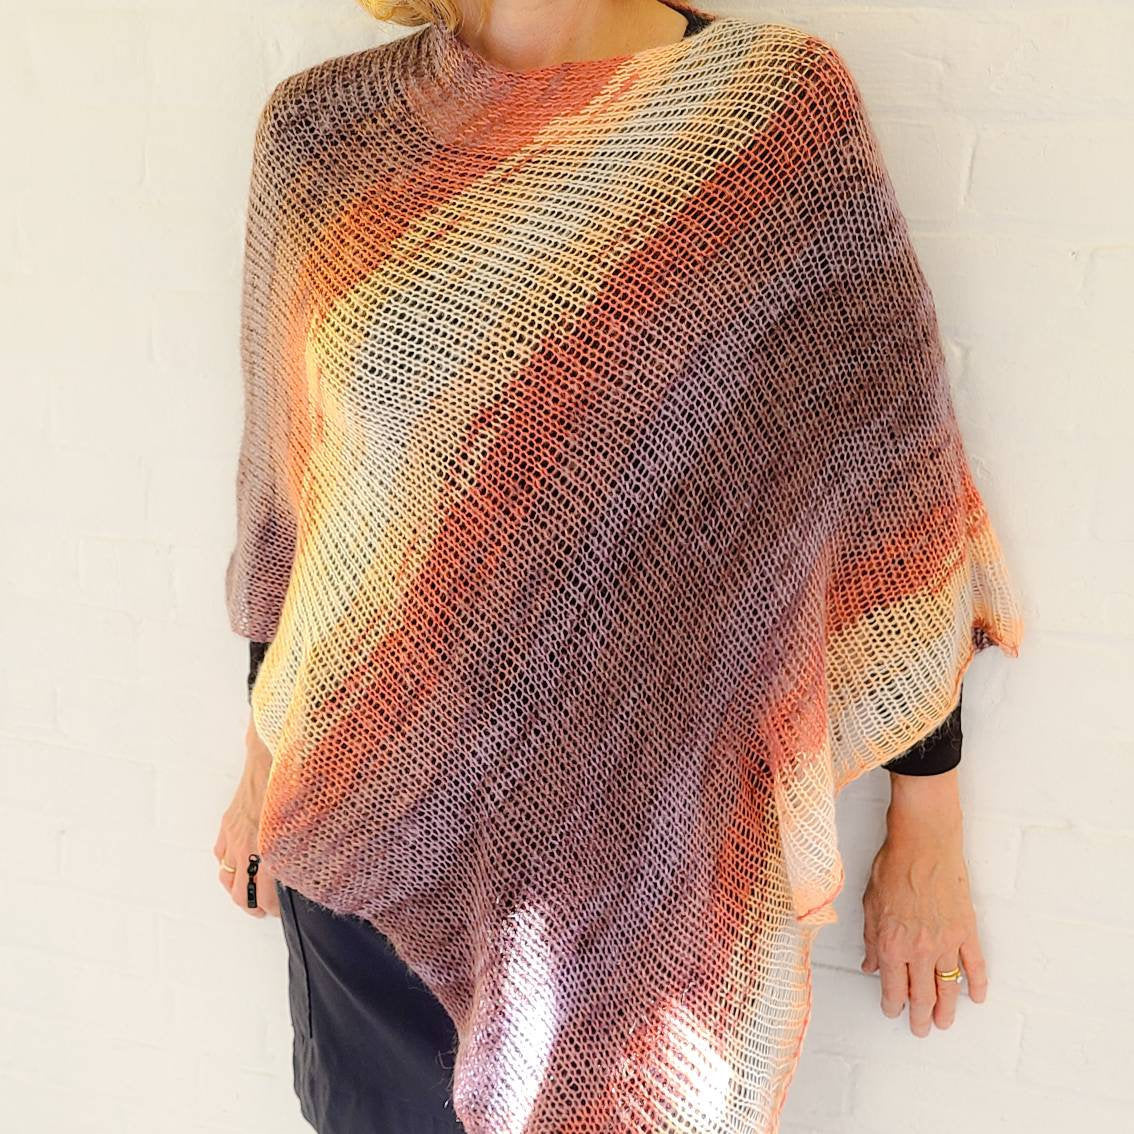 Mohair Laceweight Shawls